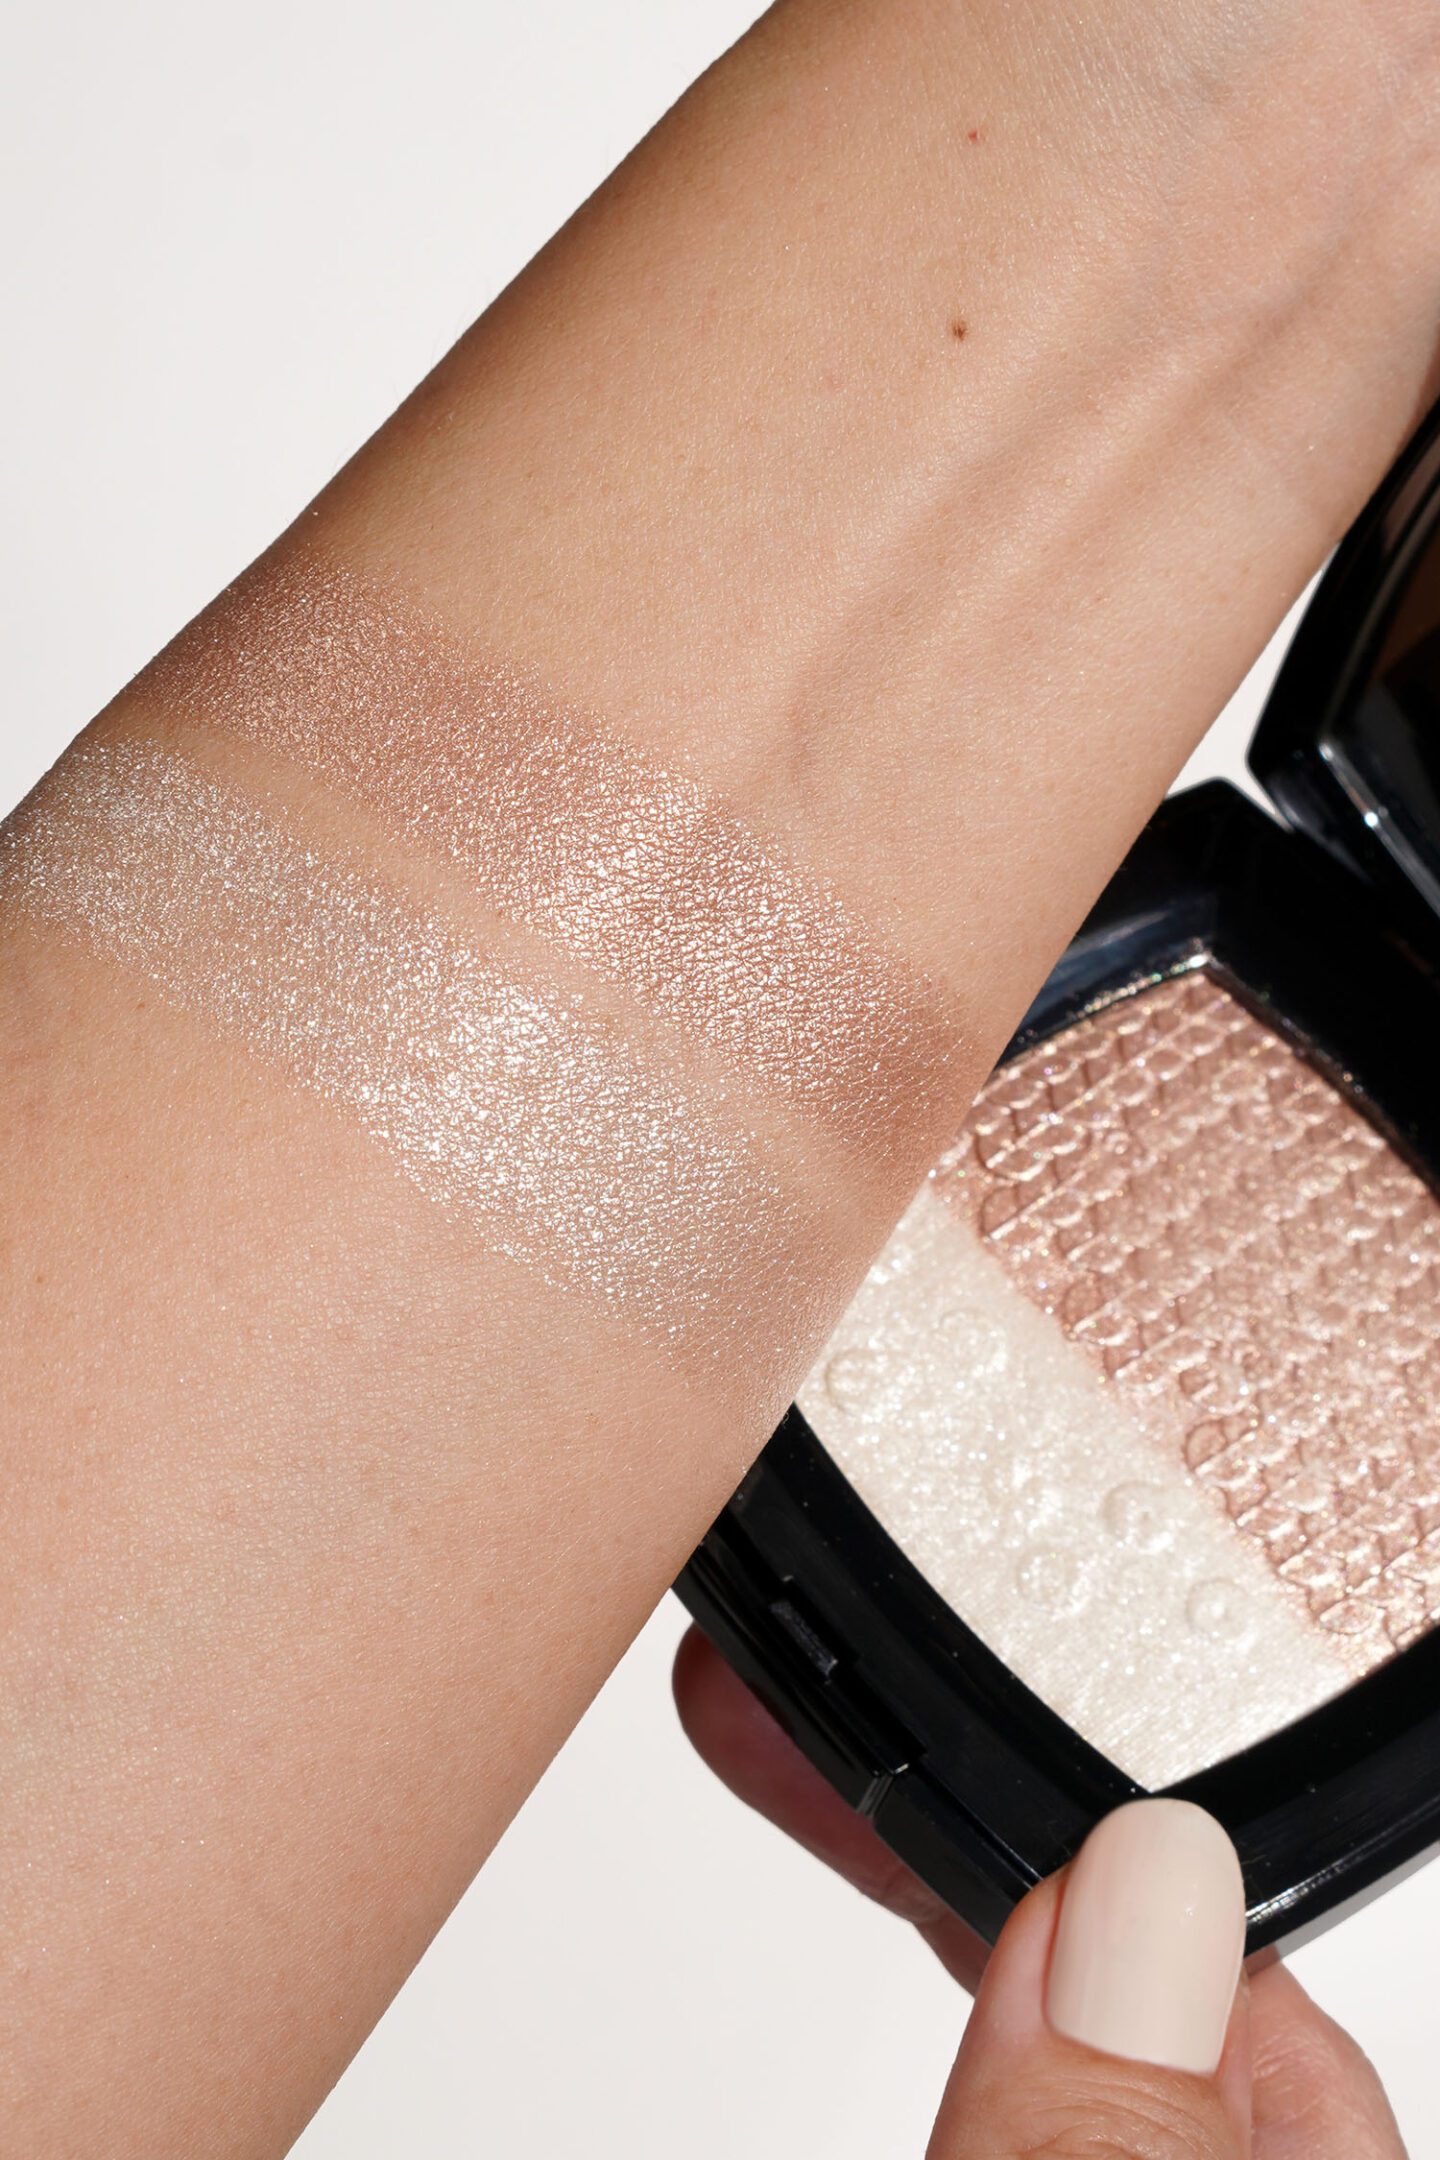 Chanel Duo Lumiere Illuminating Powder Duo swatches